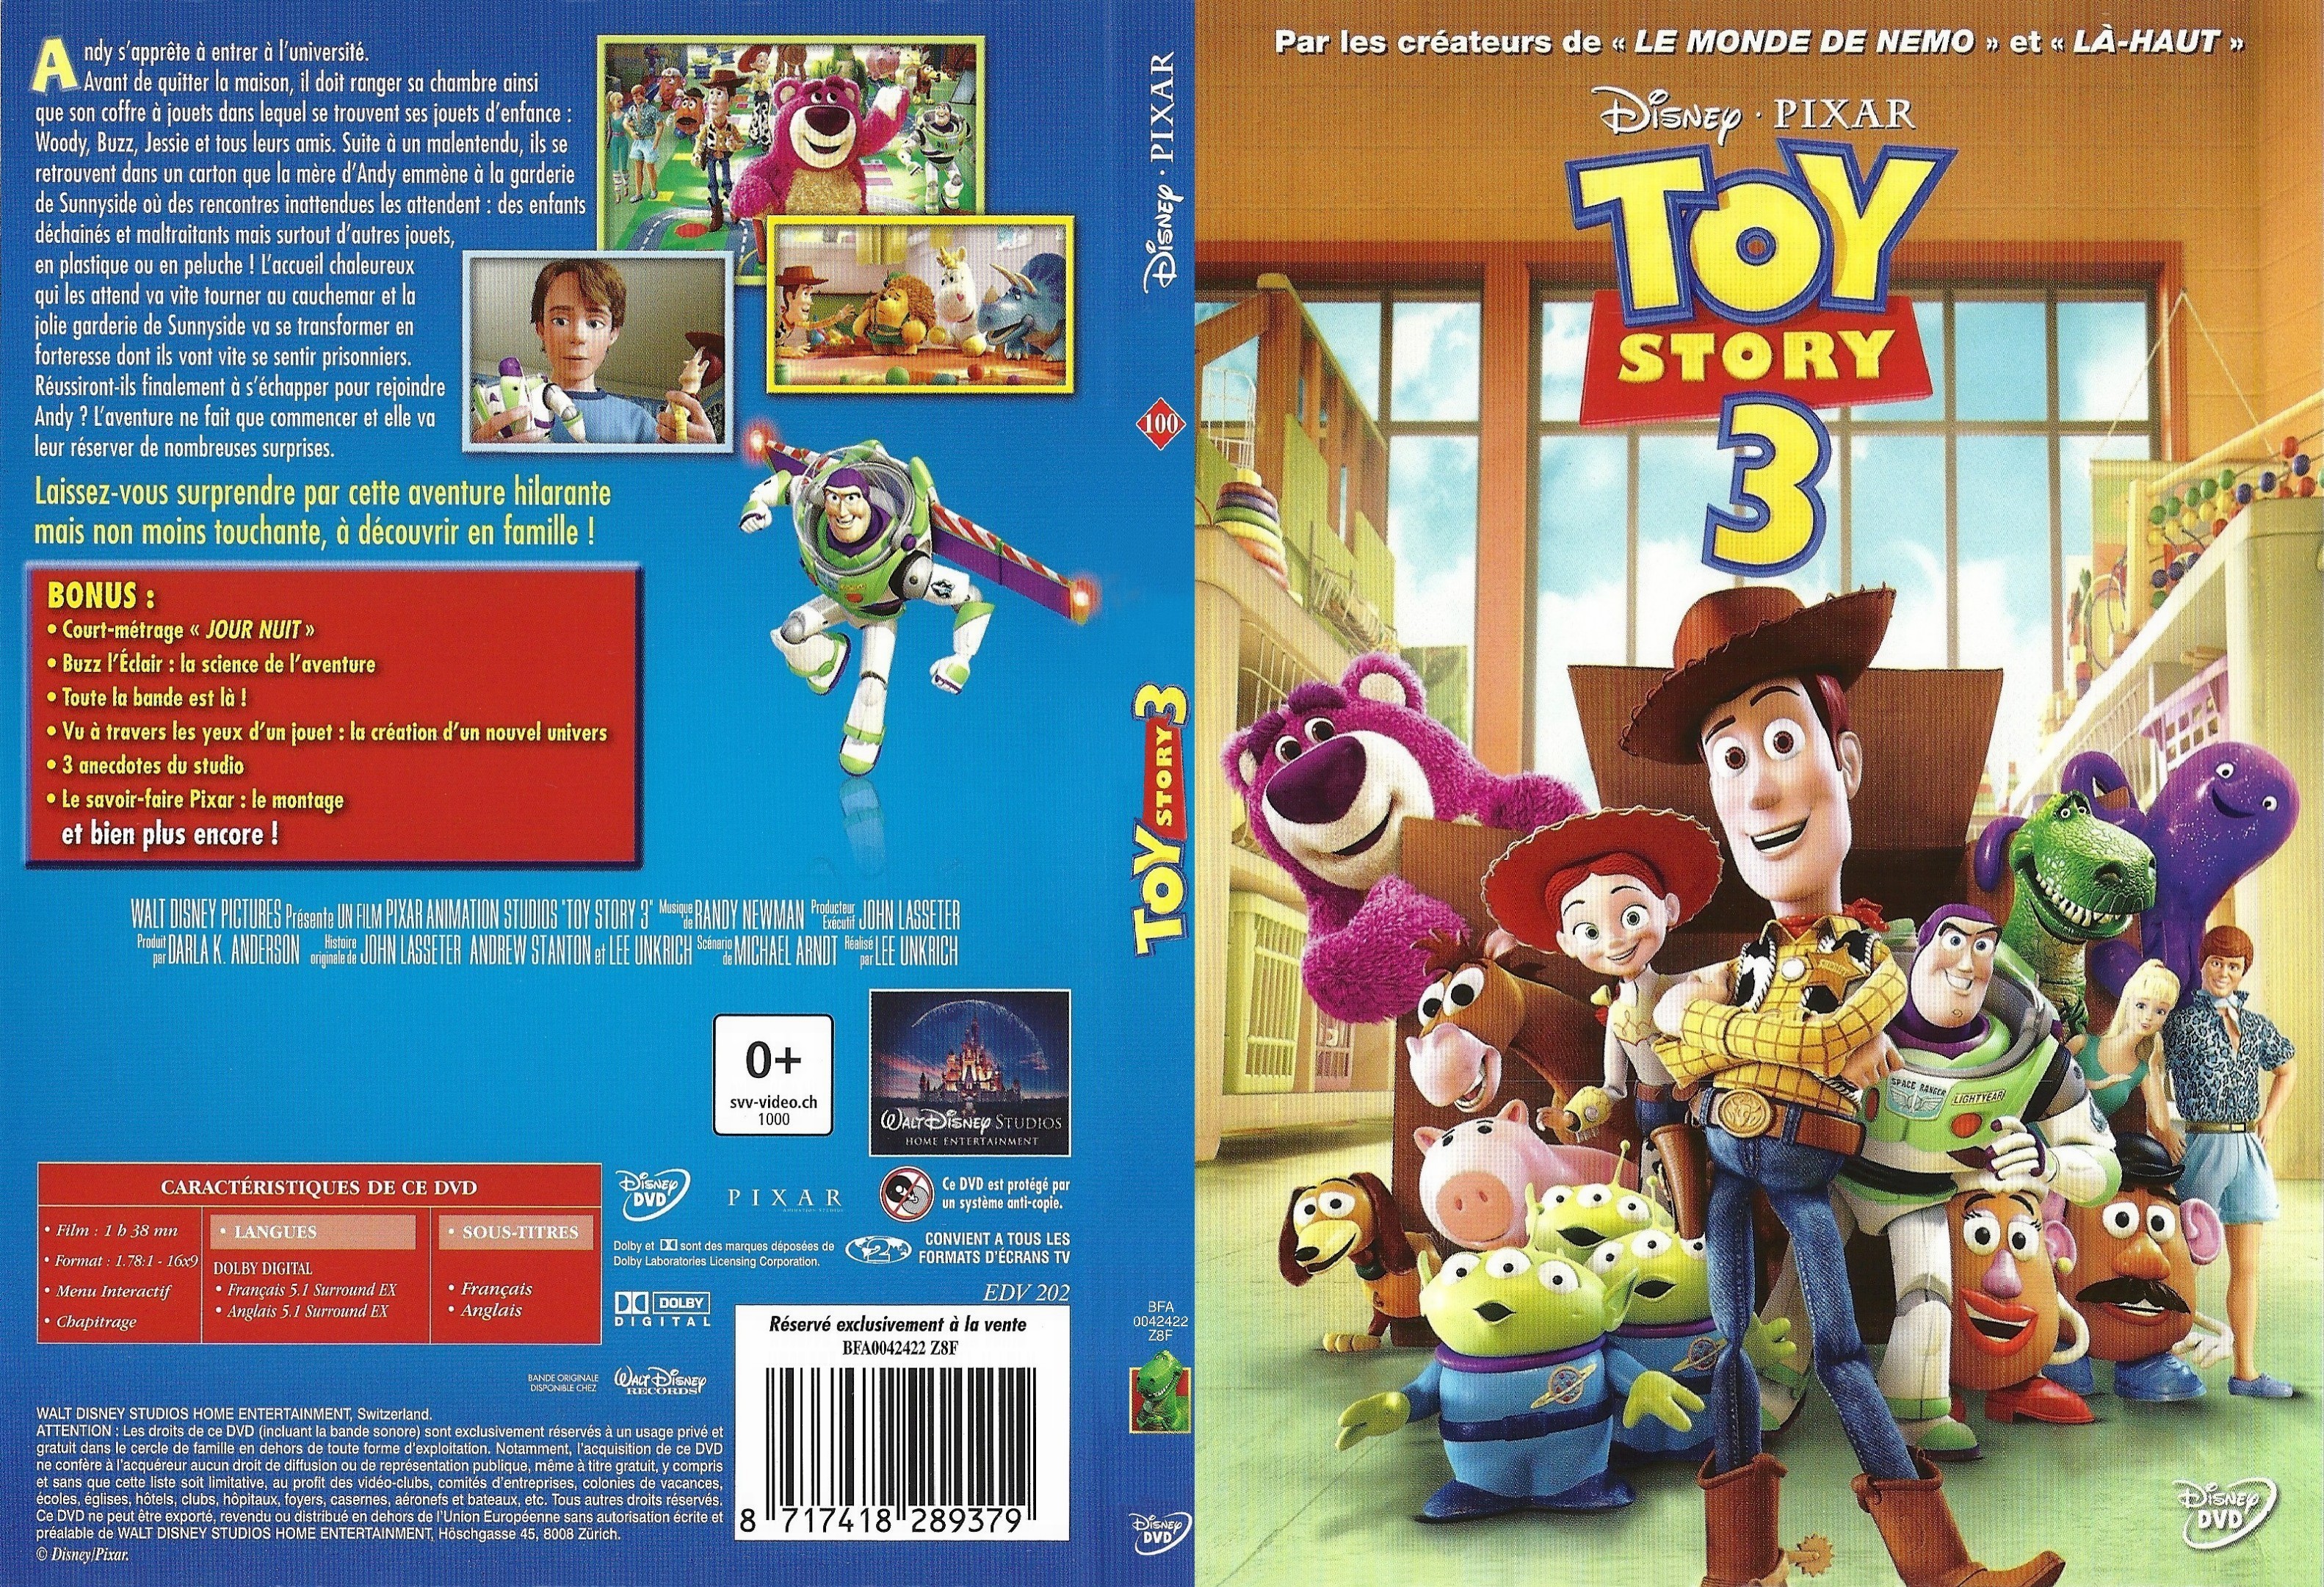 Jaquette DVD Toy story 3 - SLIM